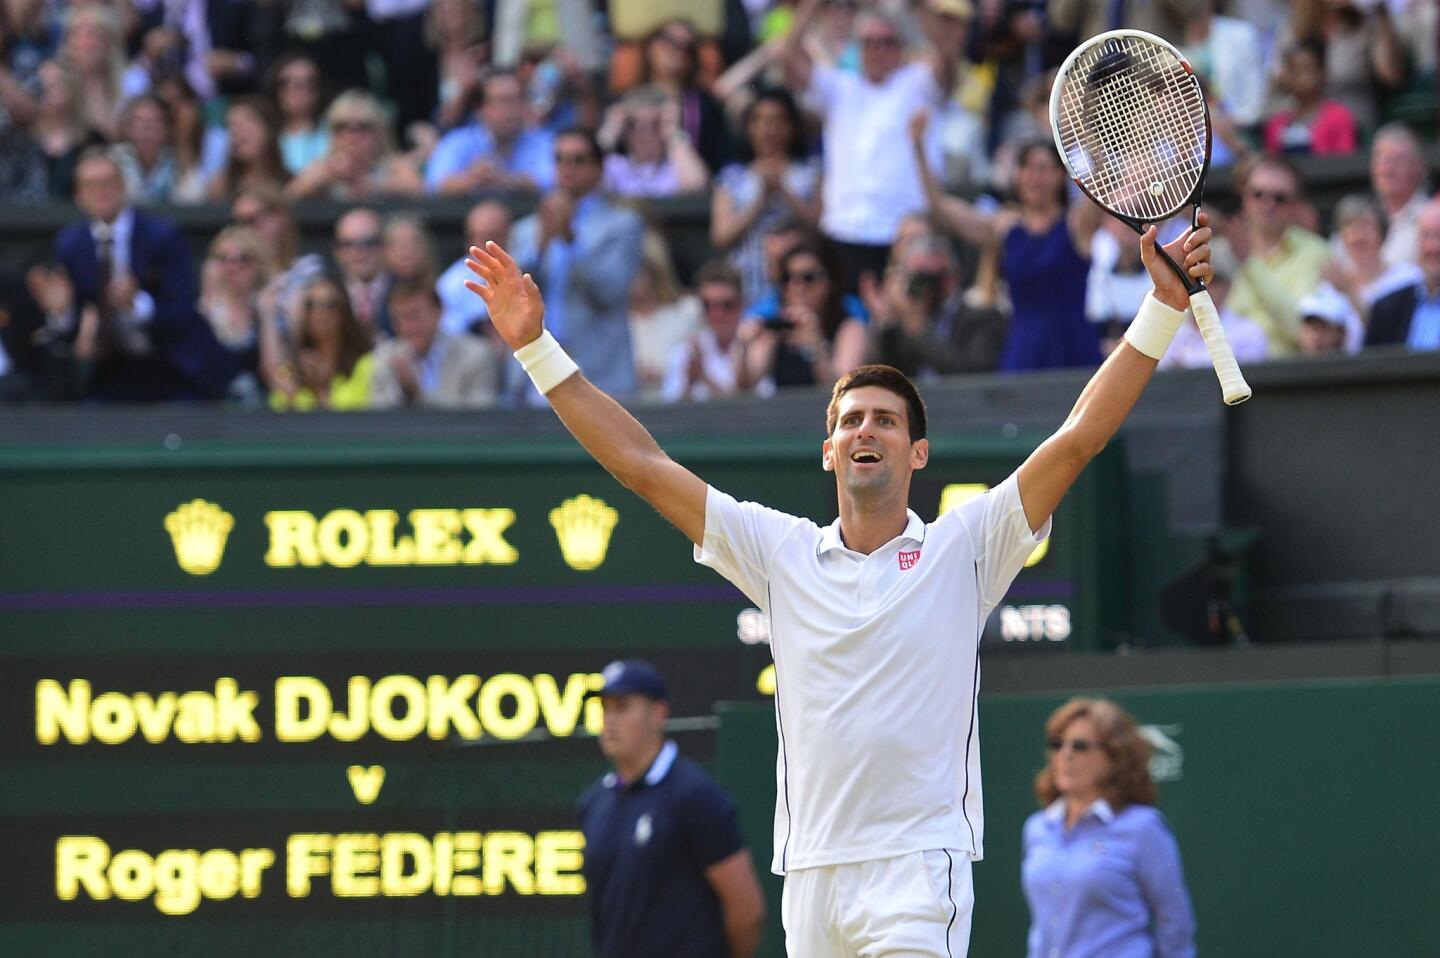 Novak Djokovic celebrates after defeating Roger Federer in five sets in the men's championship match at Wimbledon on Sunday. It was Djokovic's second Wimbledon title.